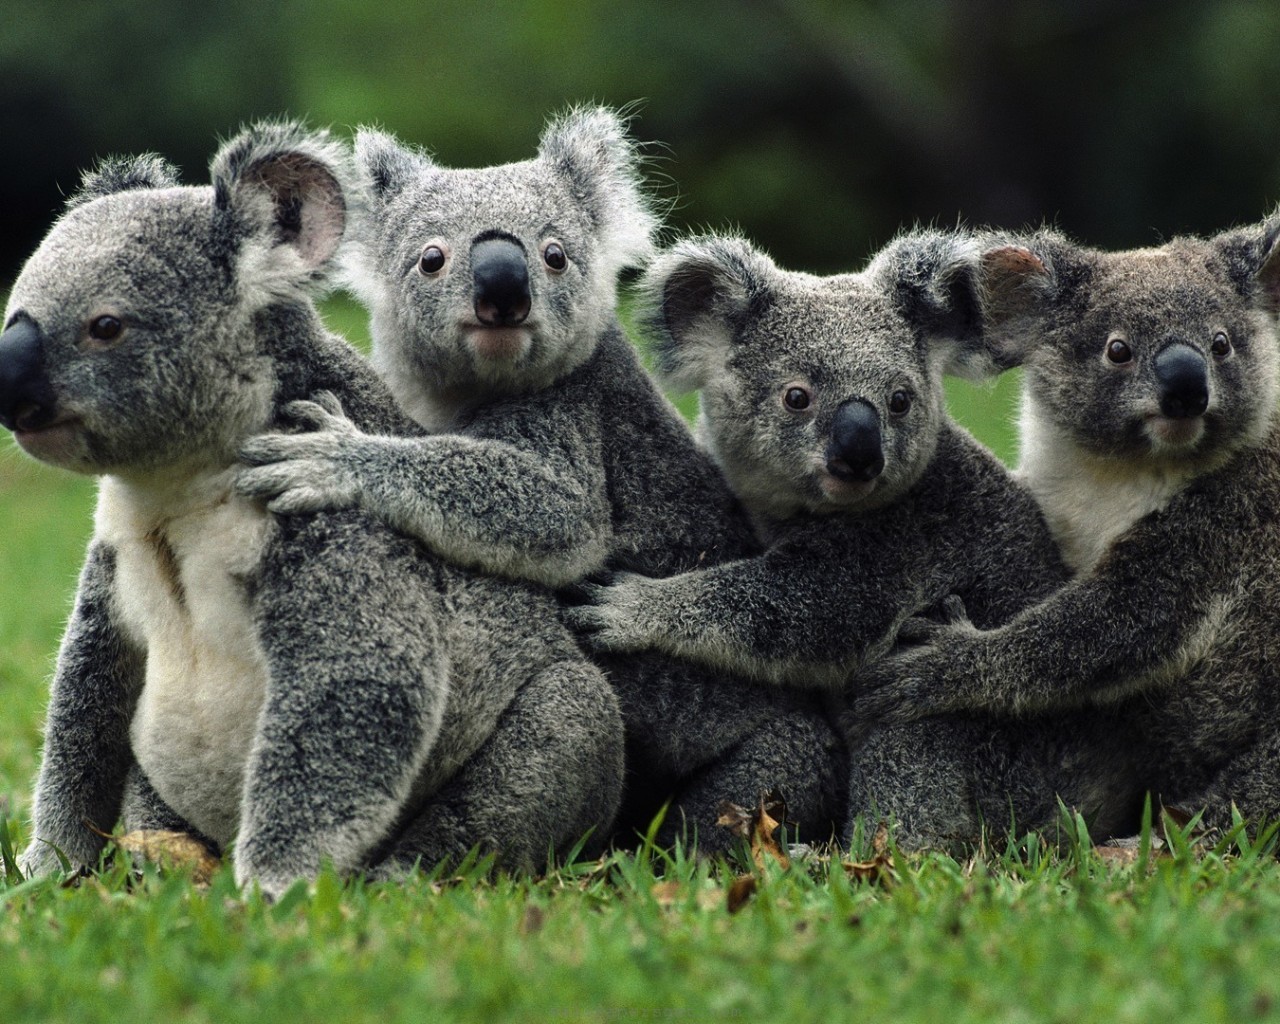 Do You Know a Little Bit About Everything? marsupials